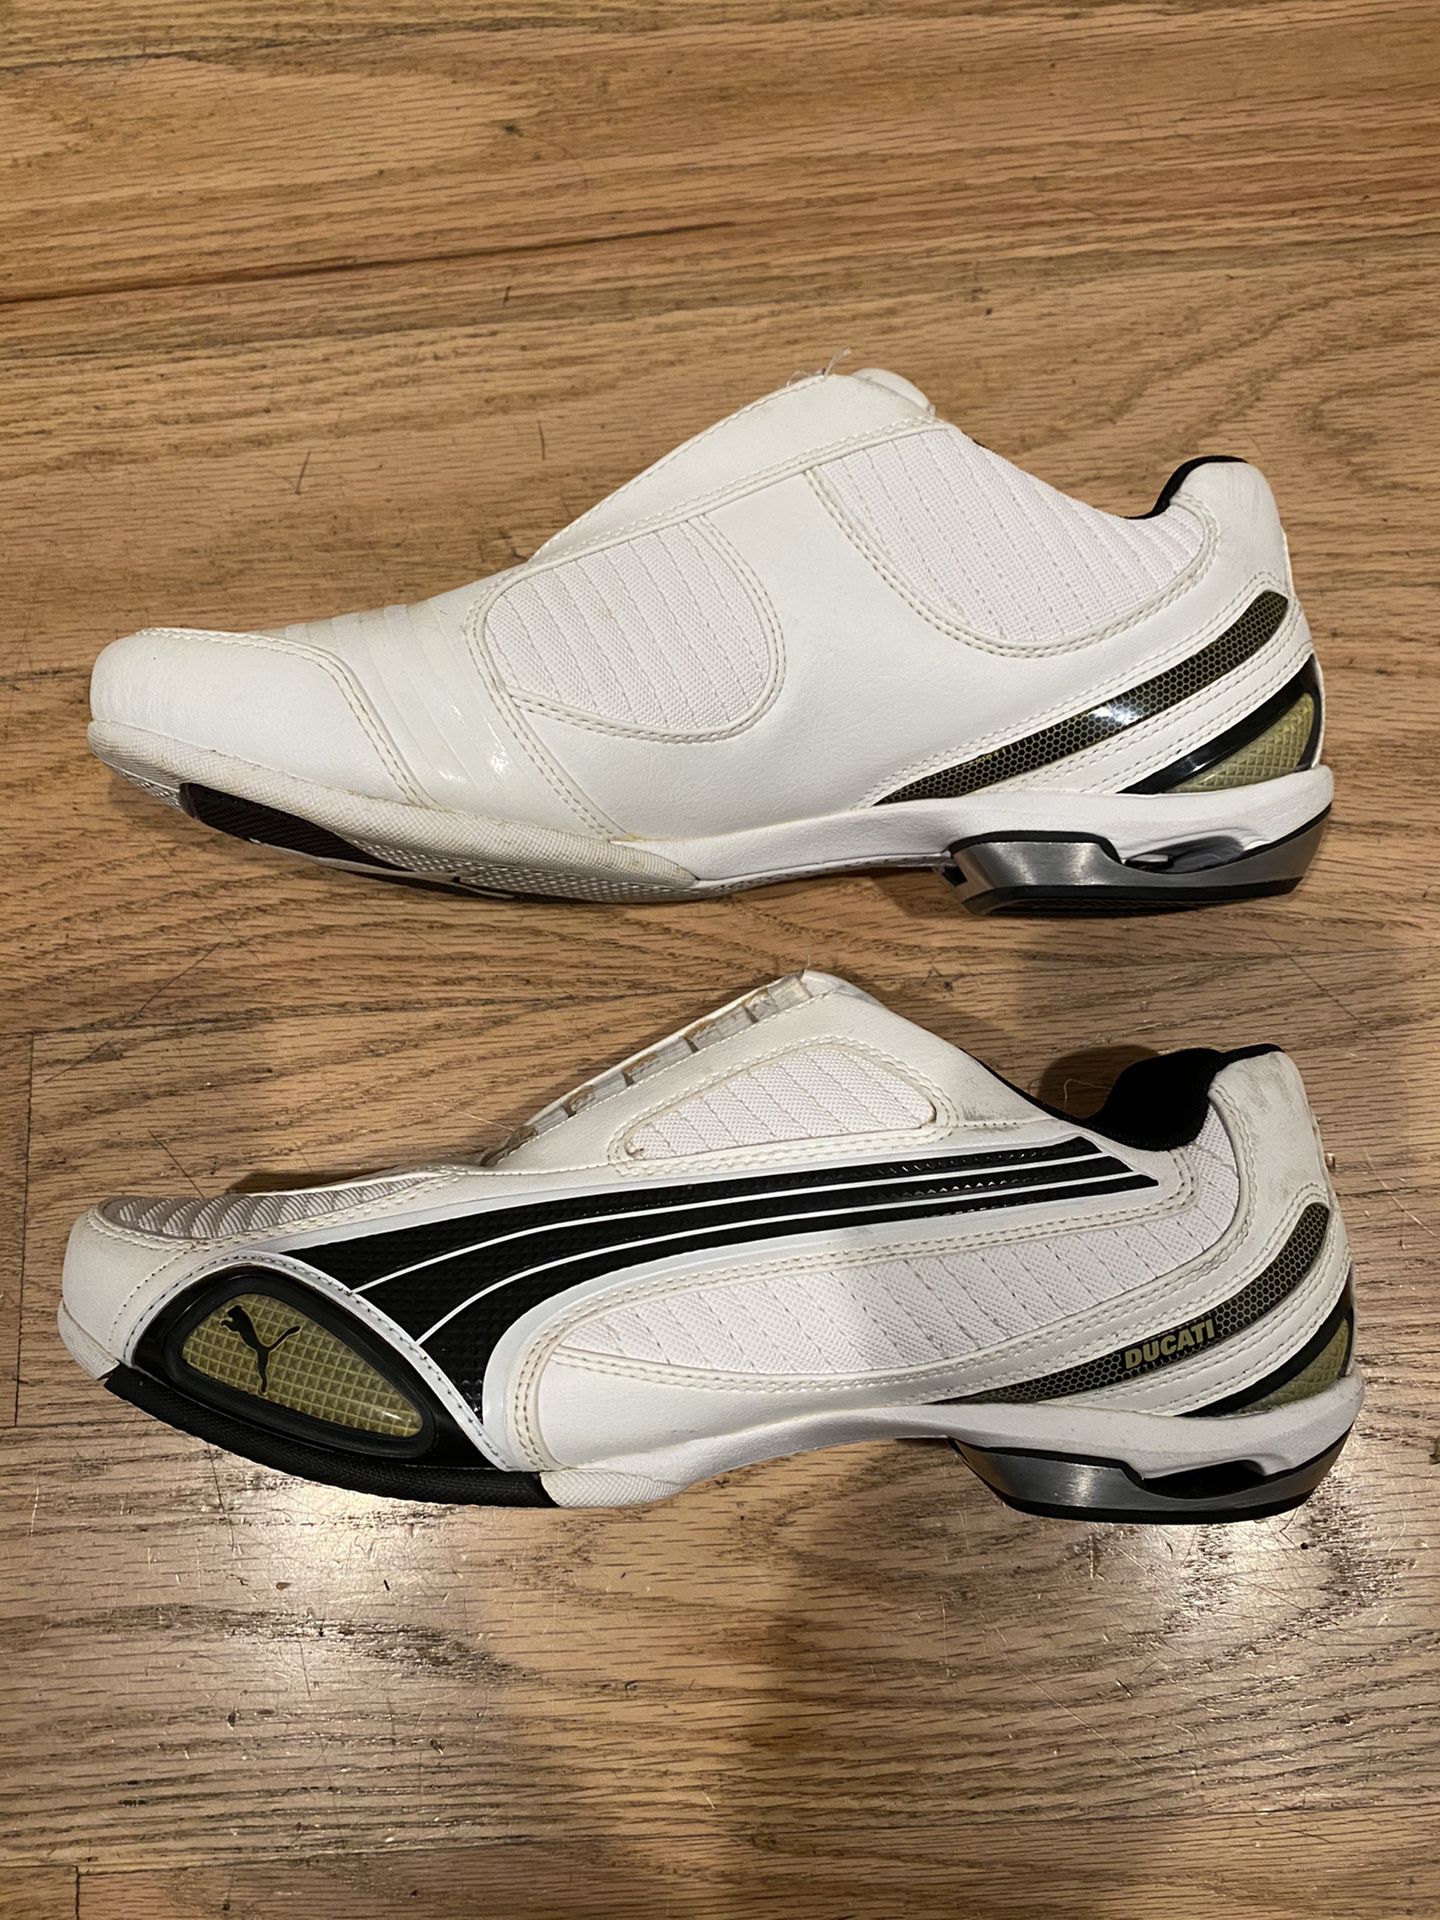 Puma Motorcycle shoes size 10 for Sale in Menlo Park, CA OfferUp